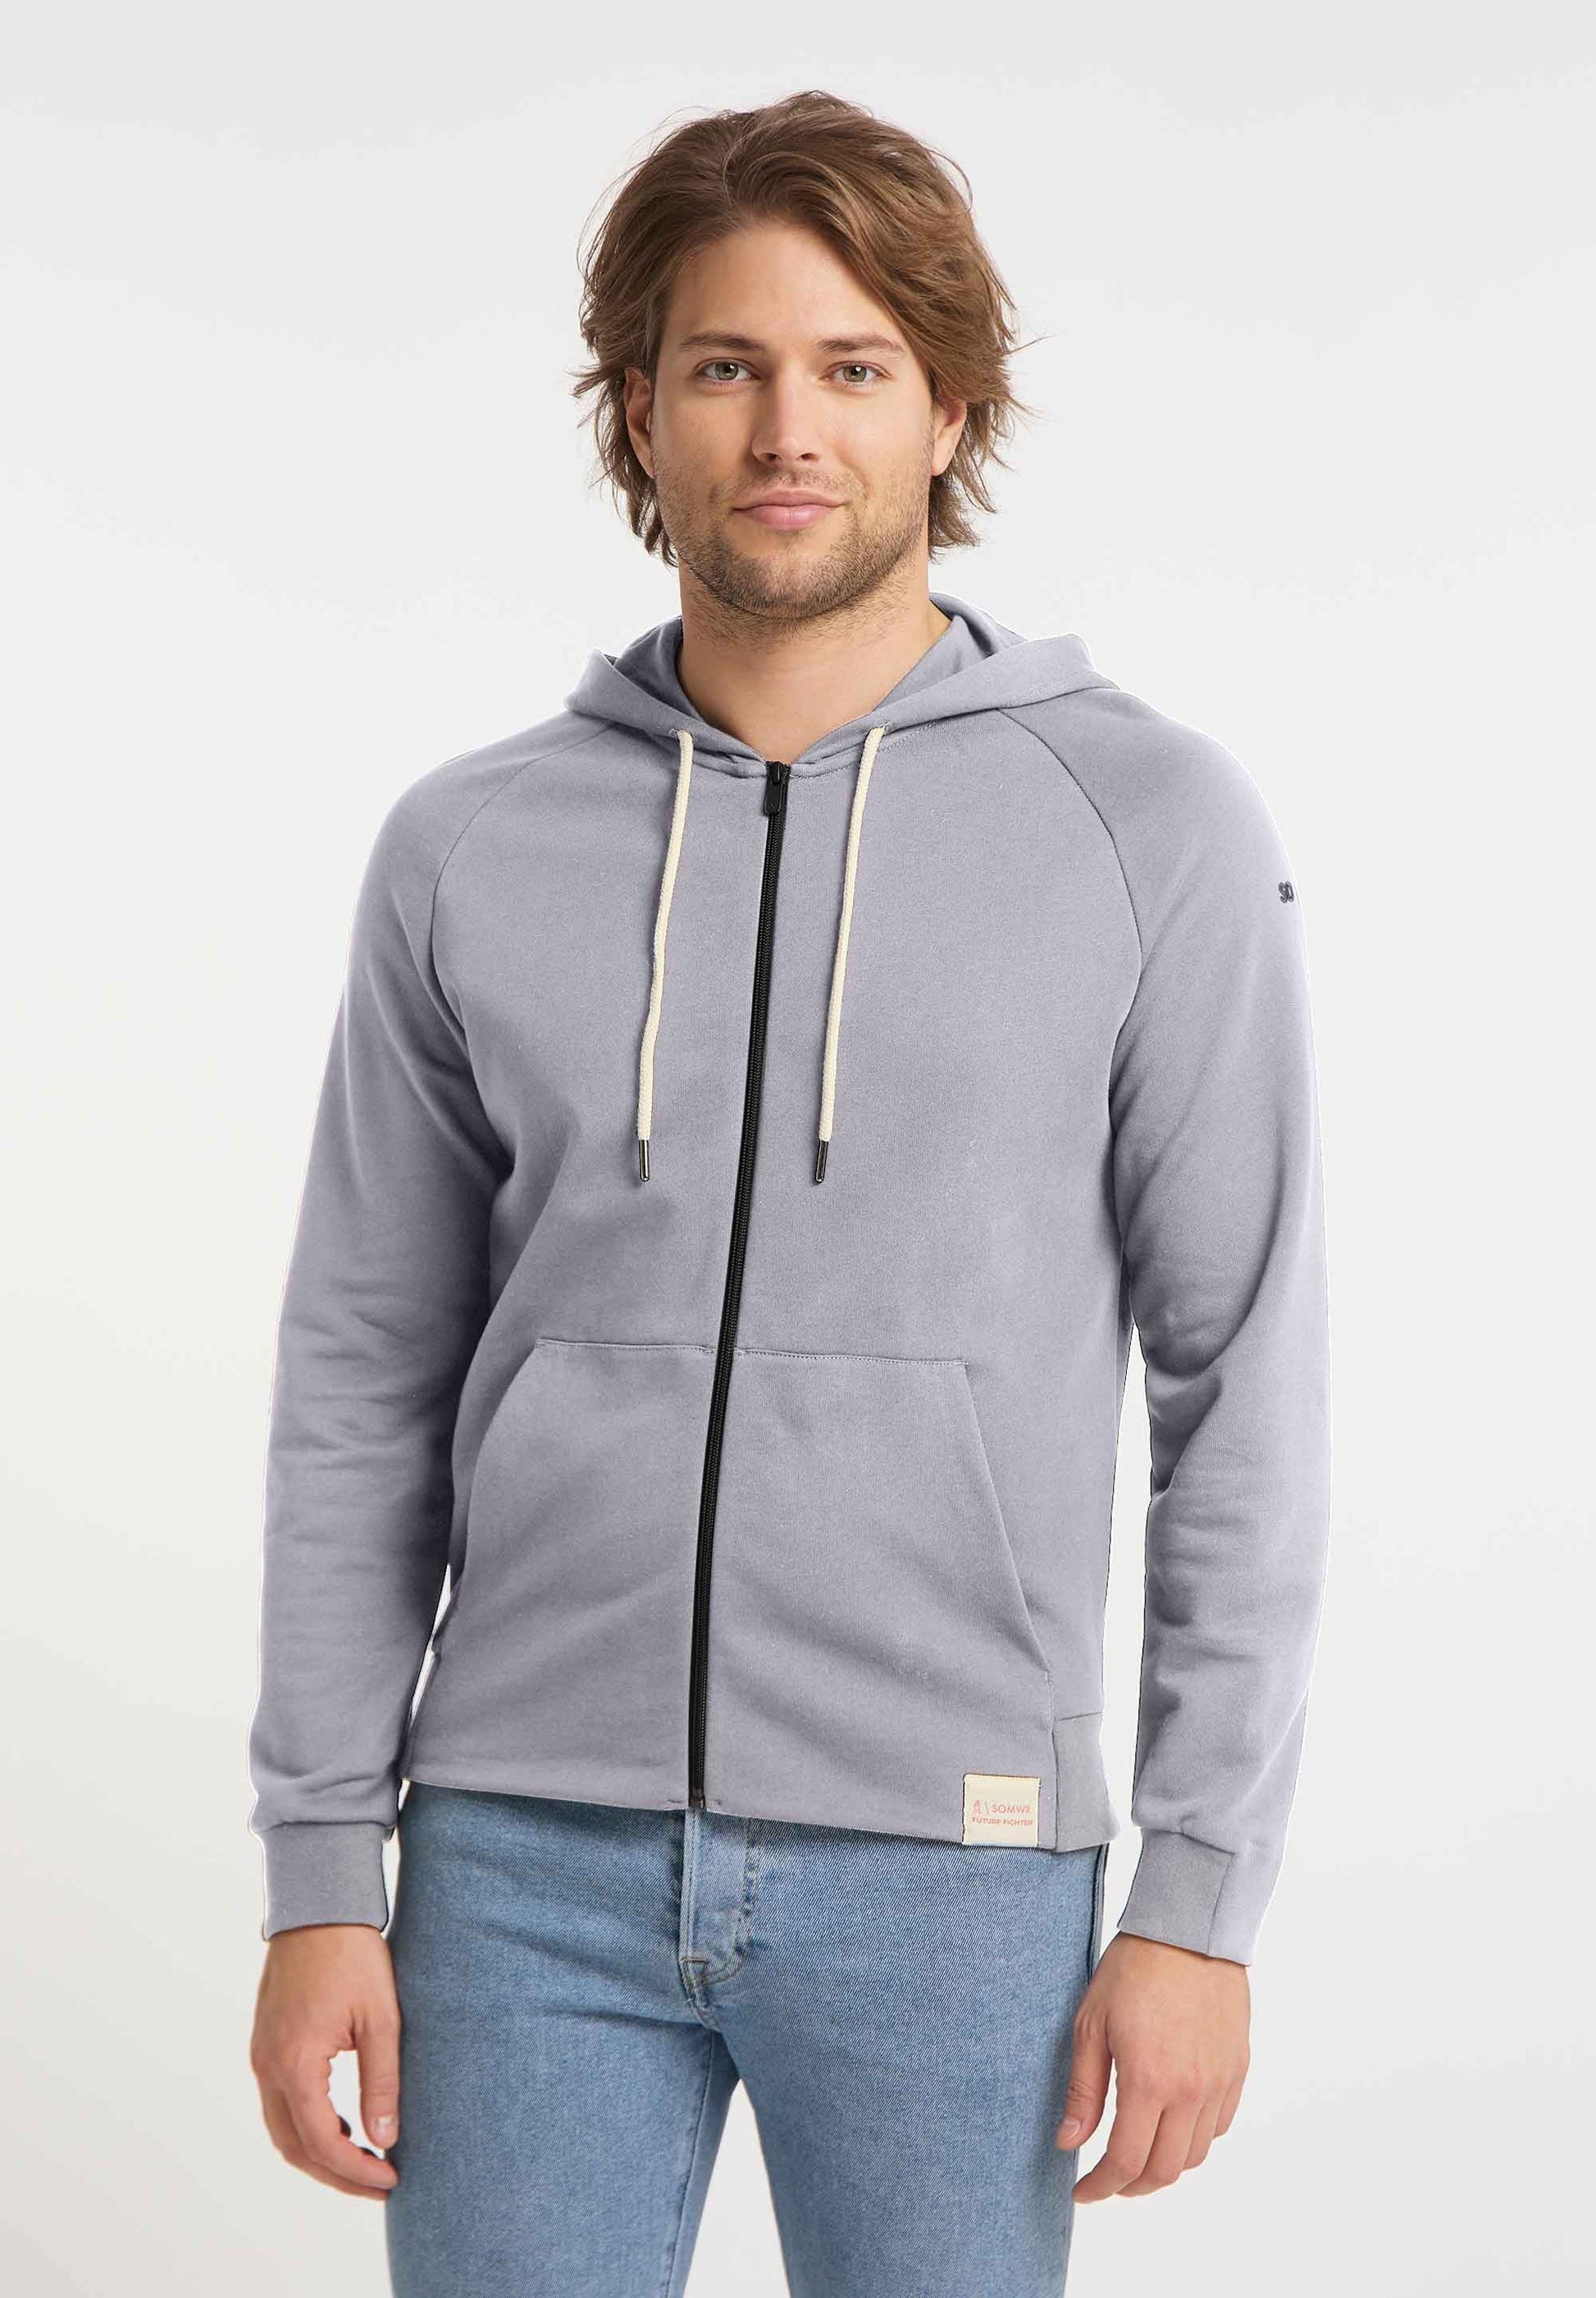 SOMWR RISE Zip-Hoodie GRY070